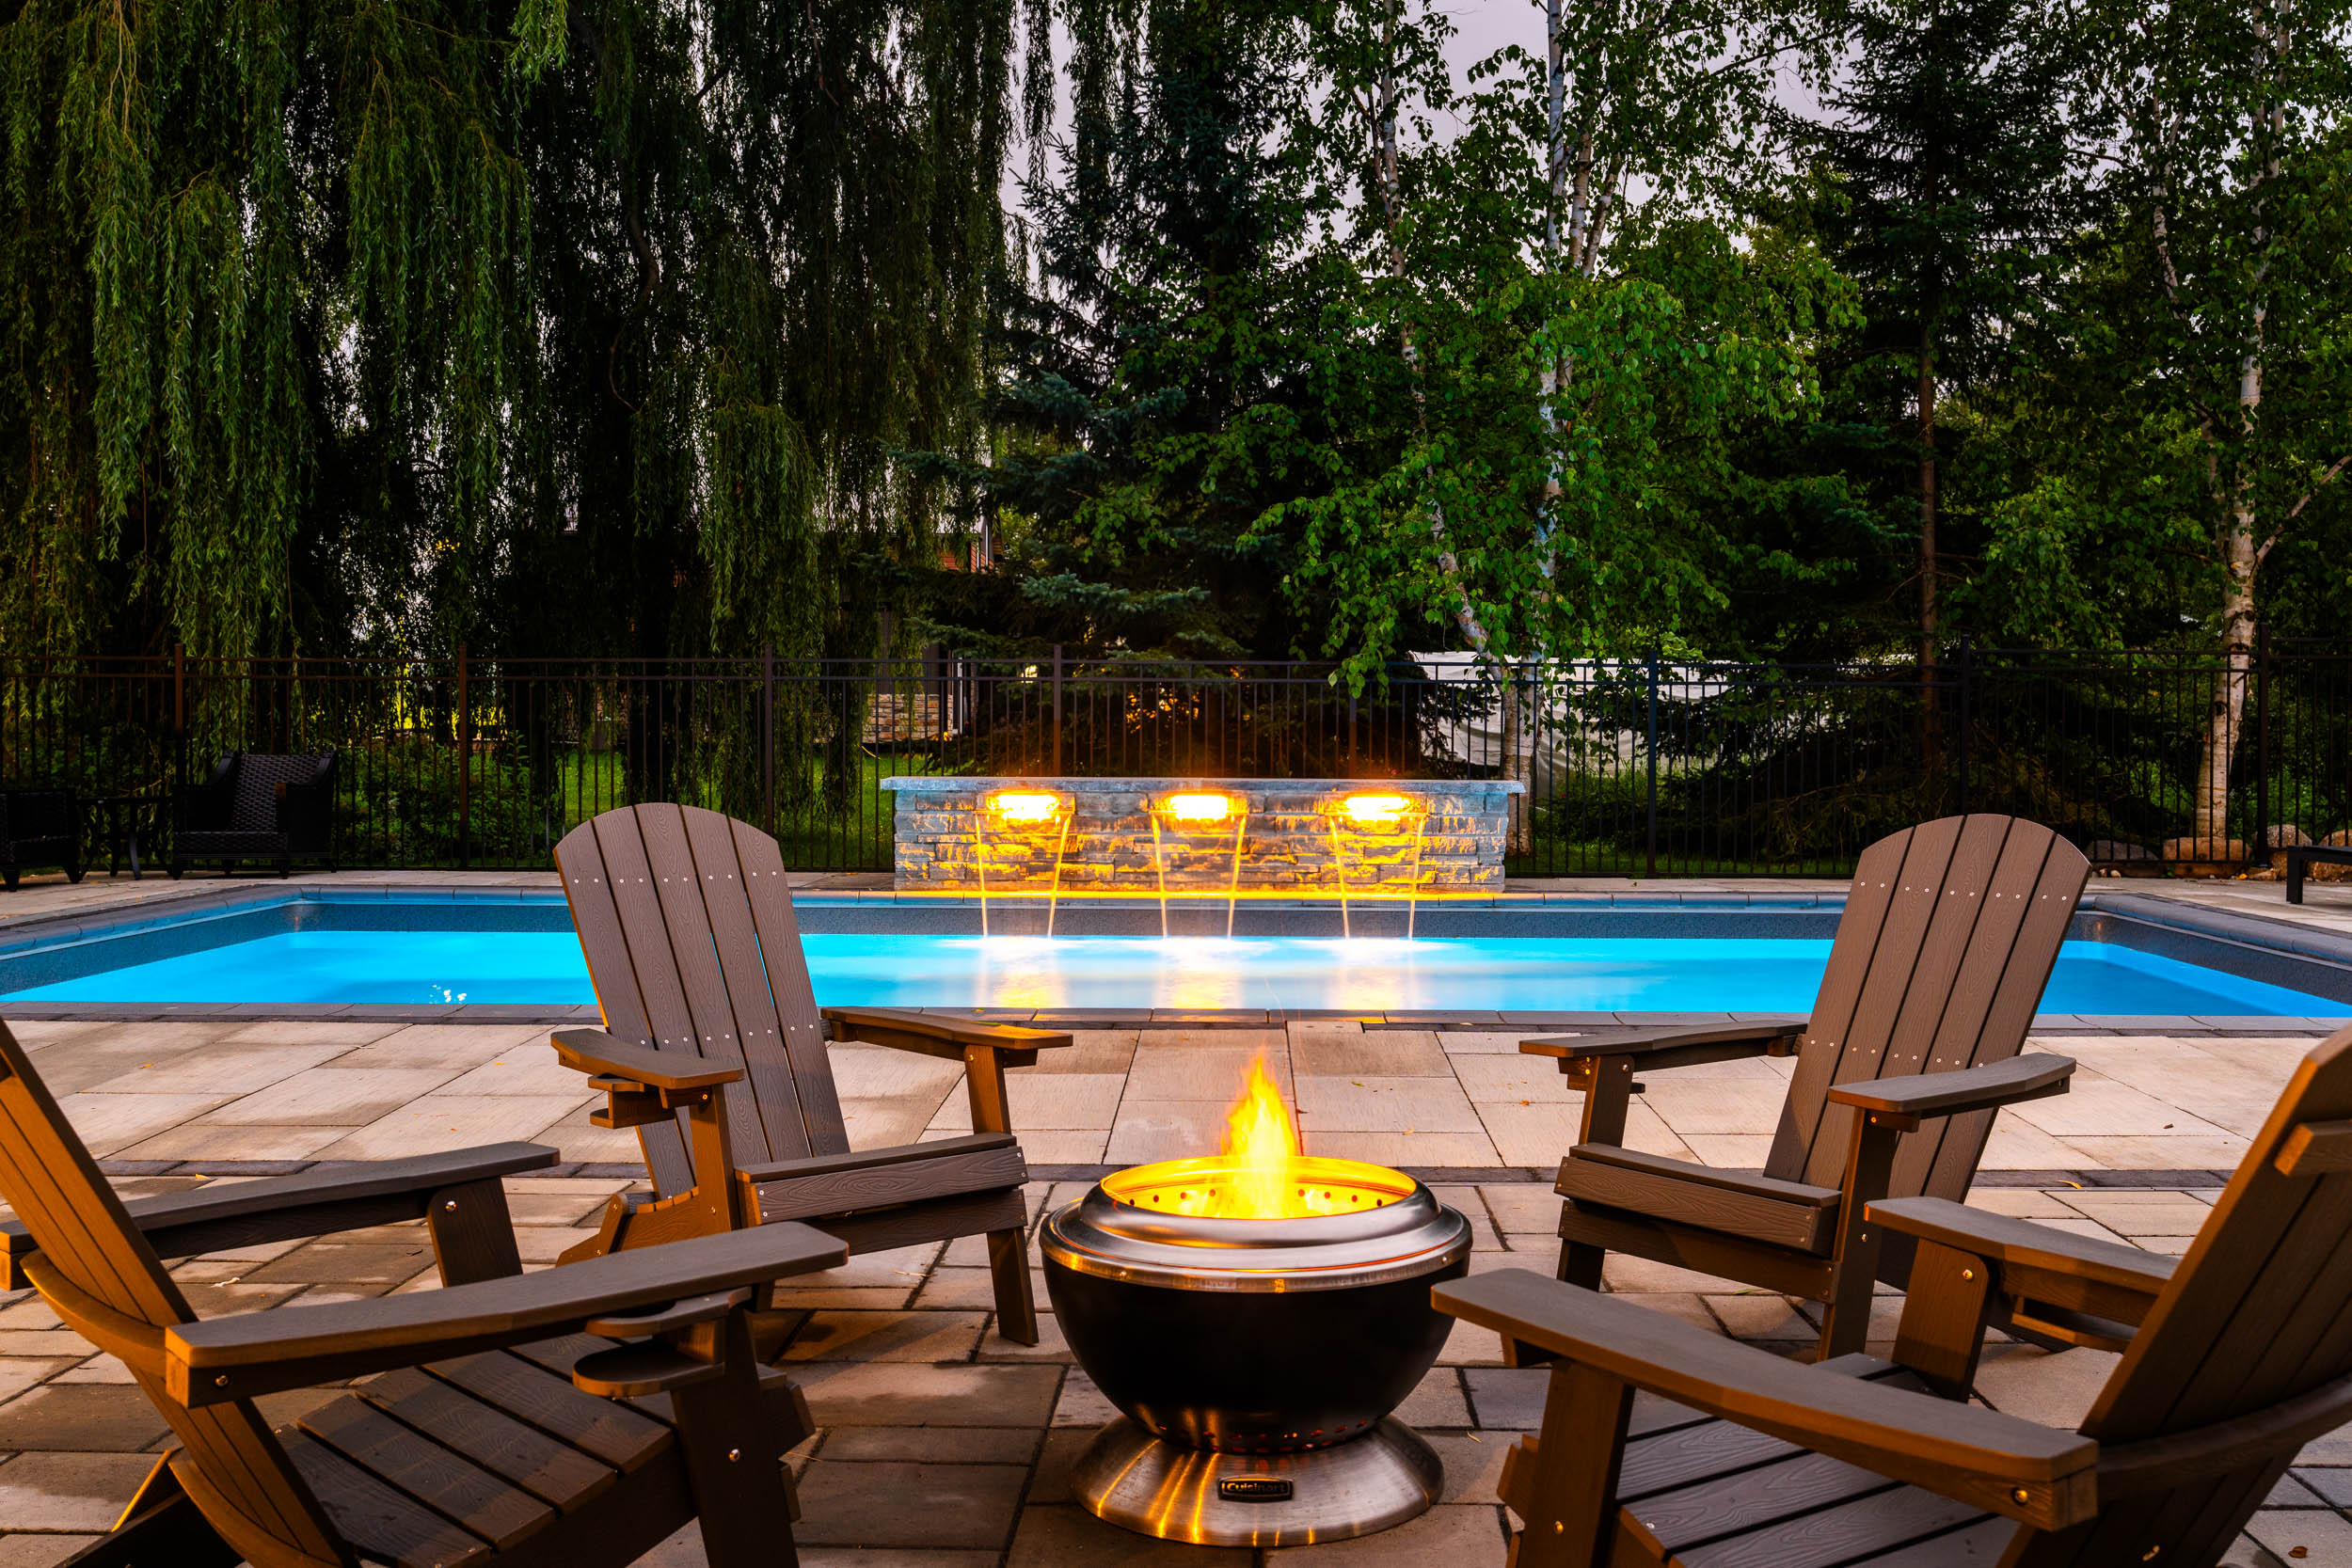 An inviting outdoor space with a swimming pool, surrounded by vegetation, featuring Adirondack chairs and a fire pit on a stone patio at dusk.